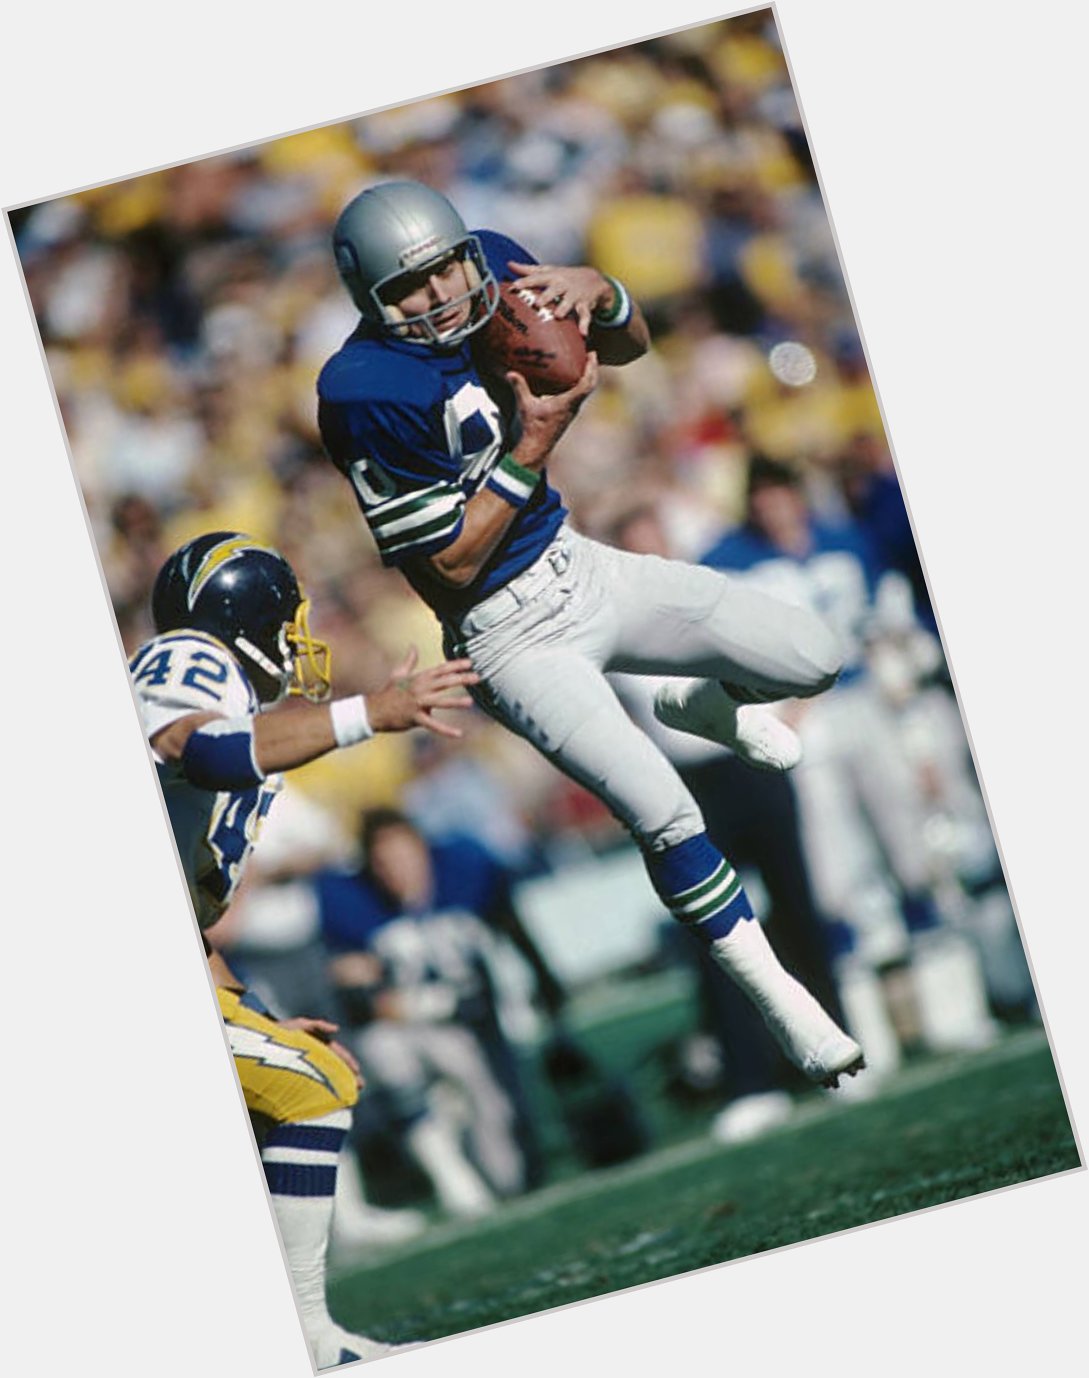 Happy Birthday to the owner of one of the best pairs of hands in NFL history, Steve Largent!  